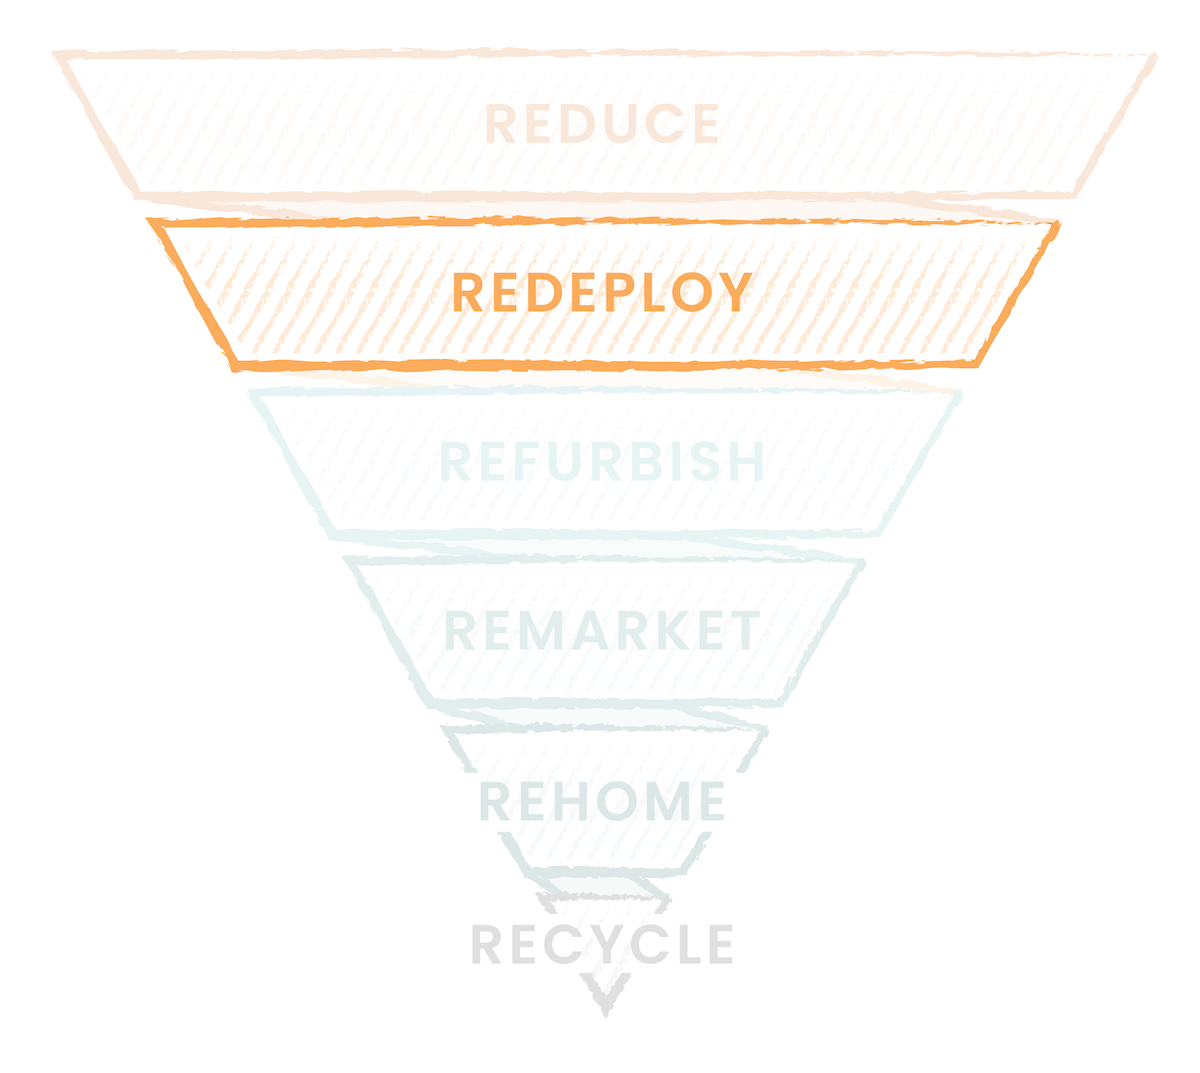 An image of an upside-down triangle shows the second layer of the technology recycle pyramid: “Redeploy”